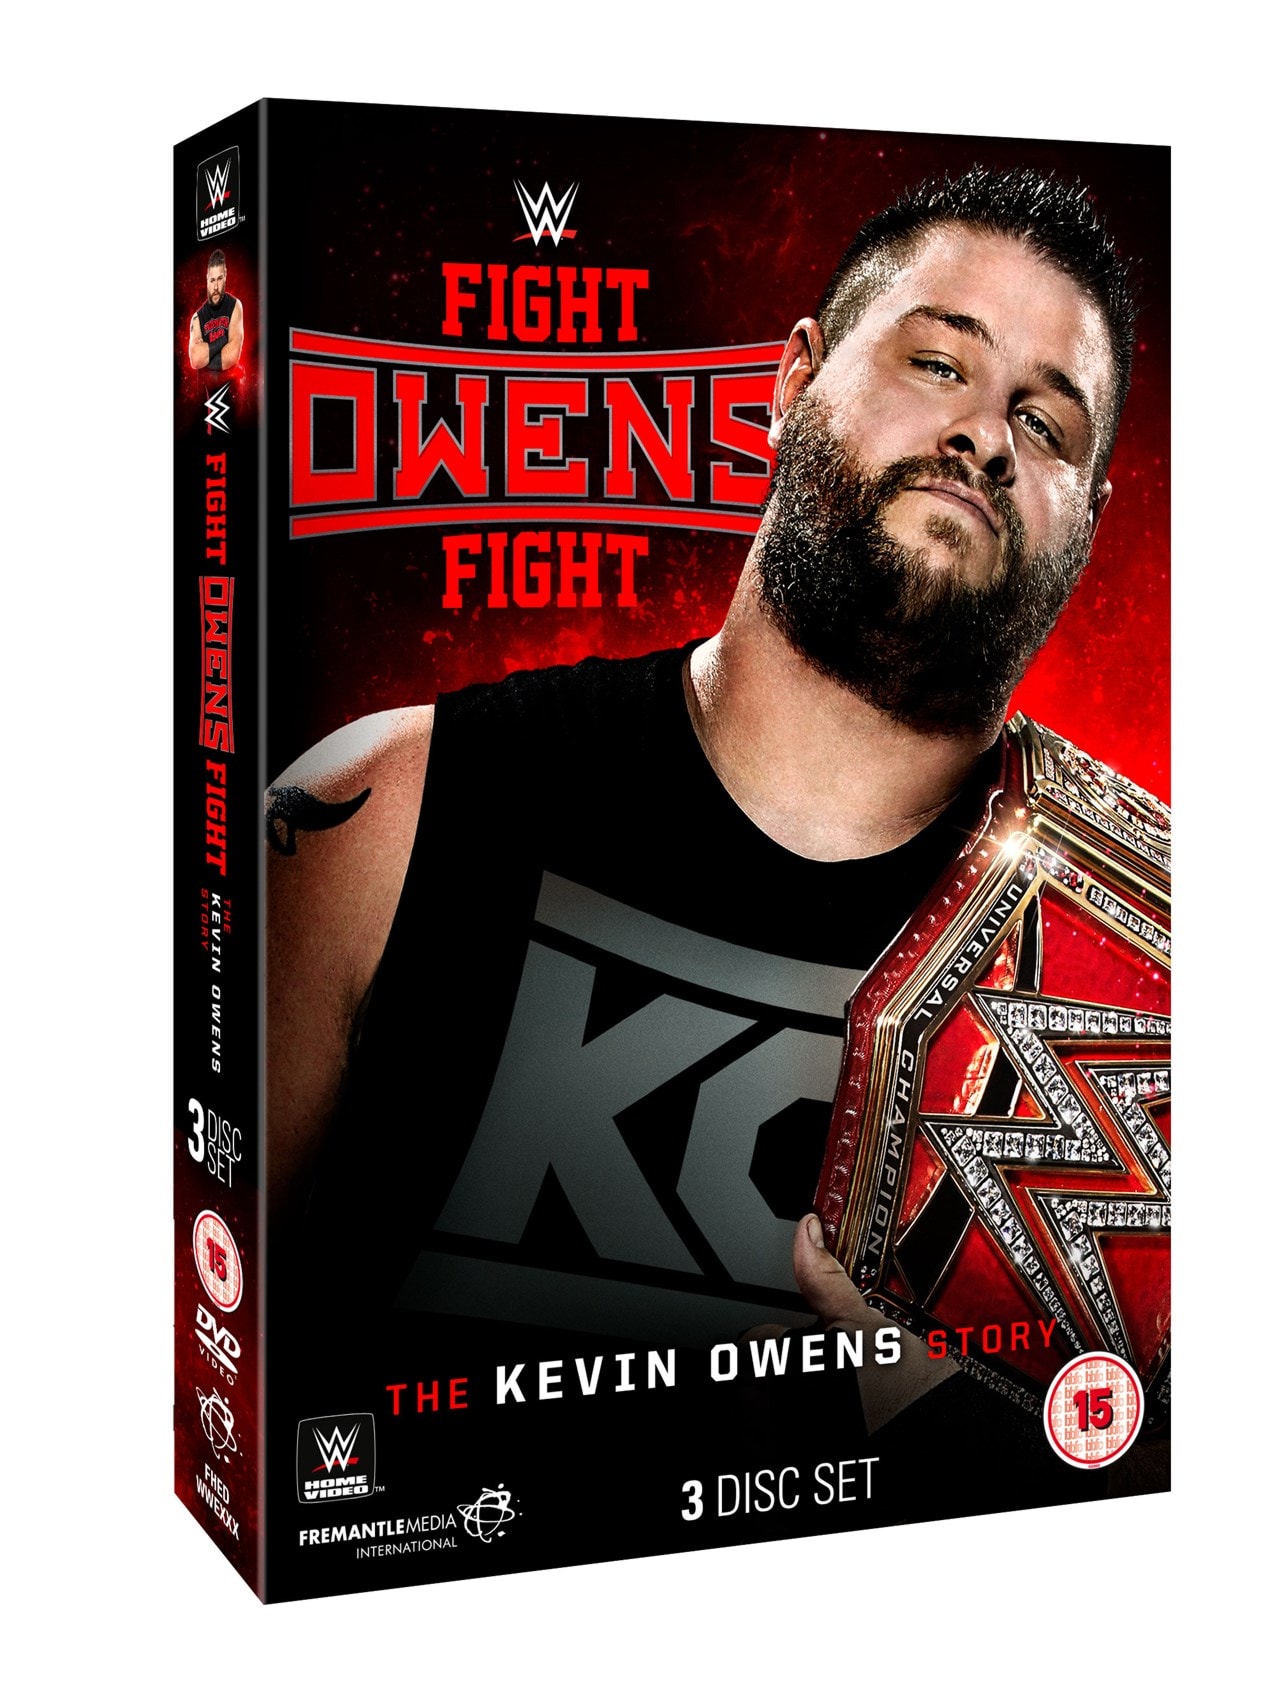 WWE Fight Owens Fight The Kevin Owens Story DVD Box Set Free